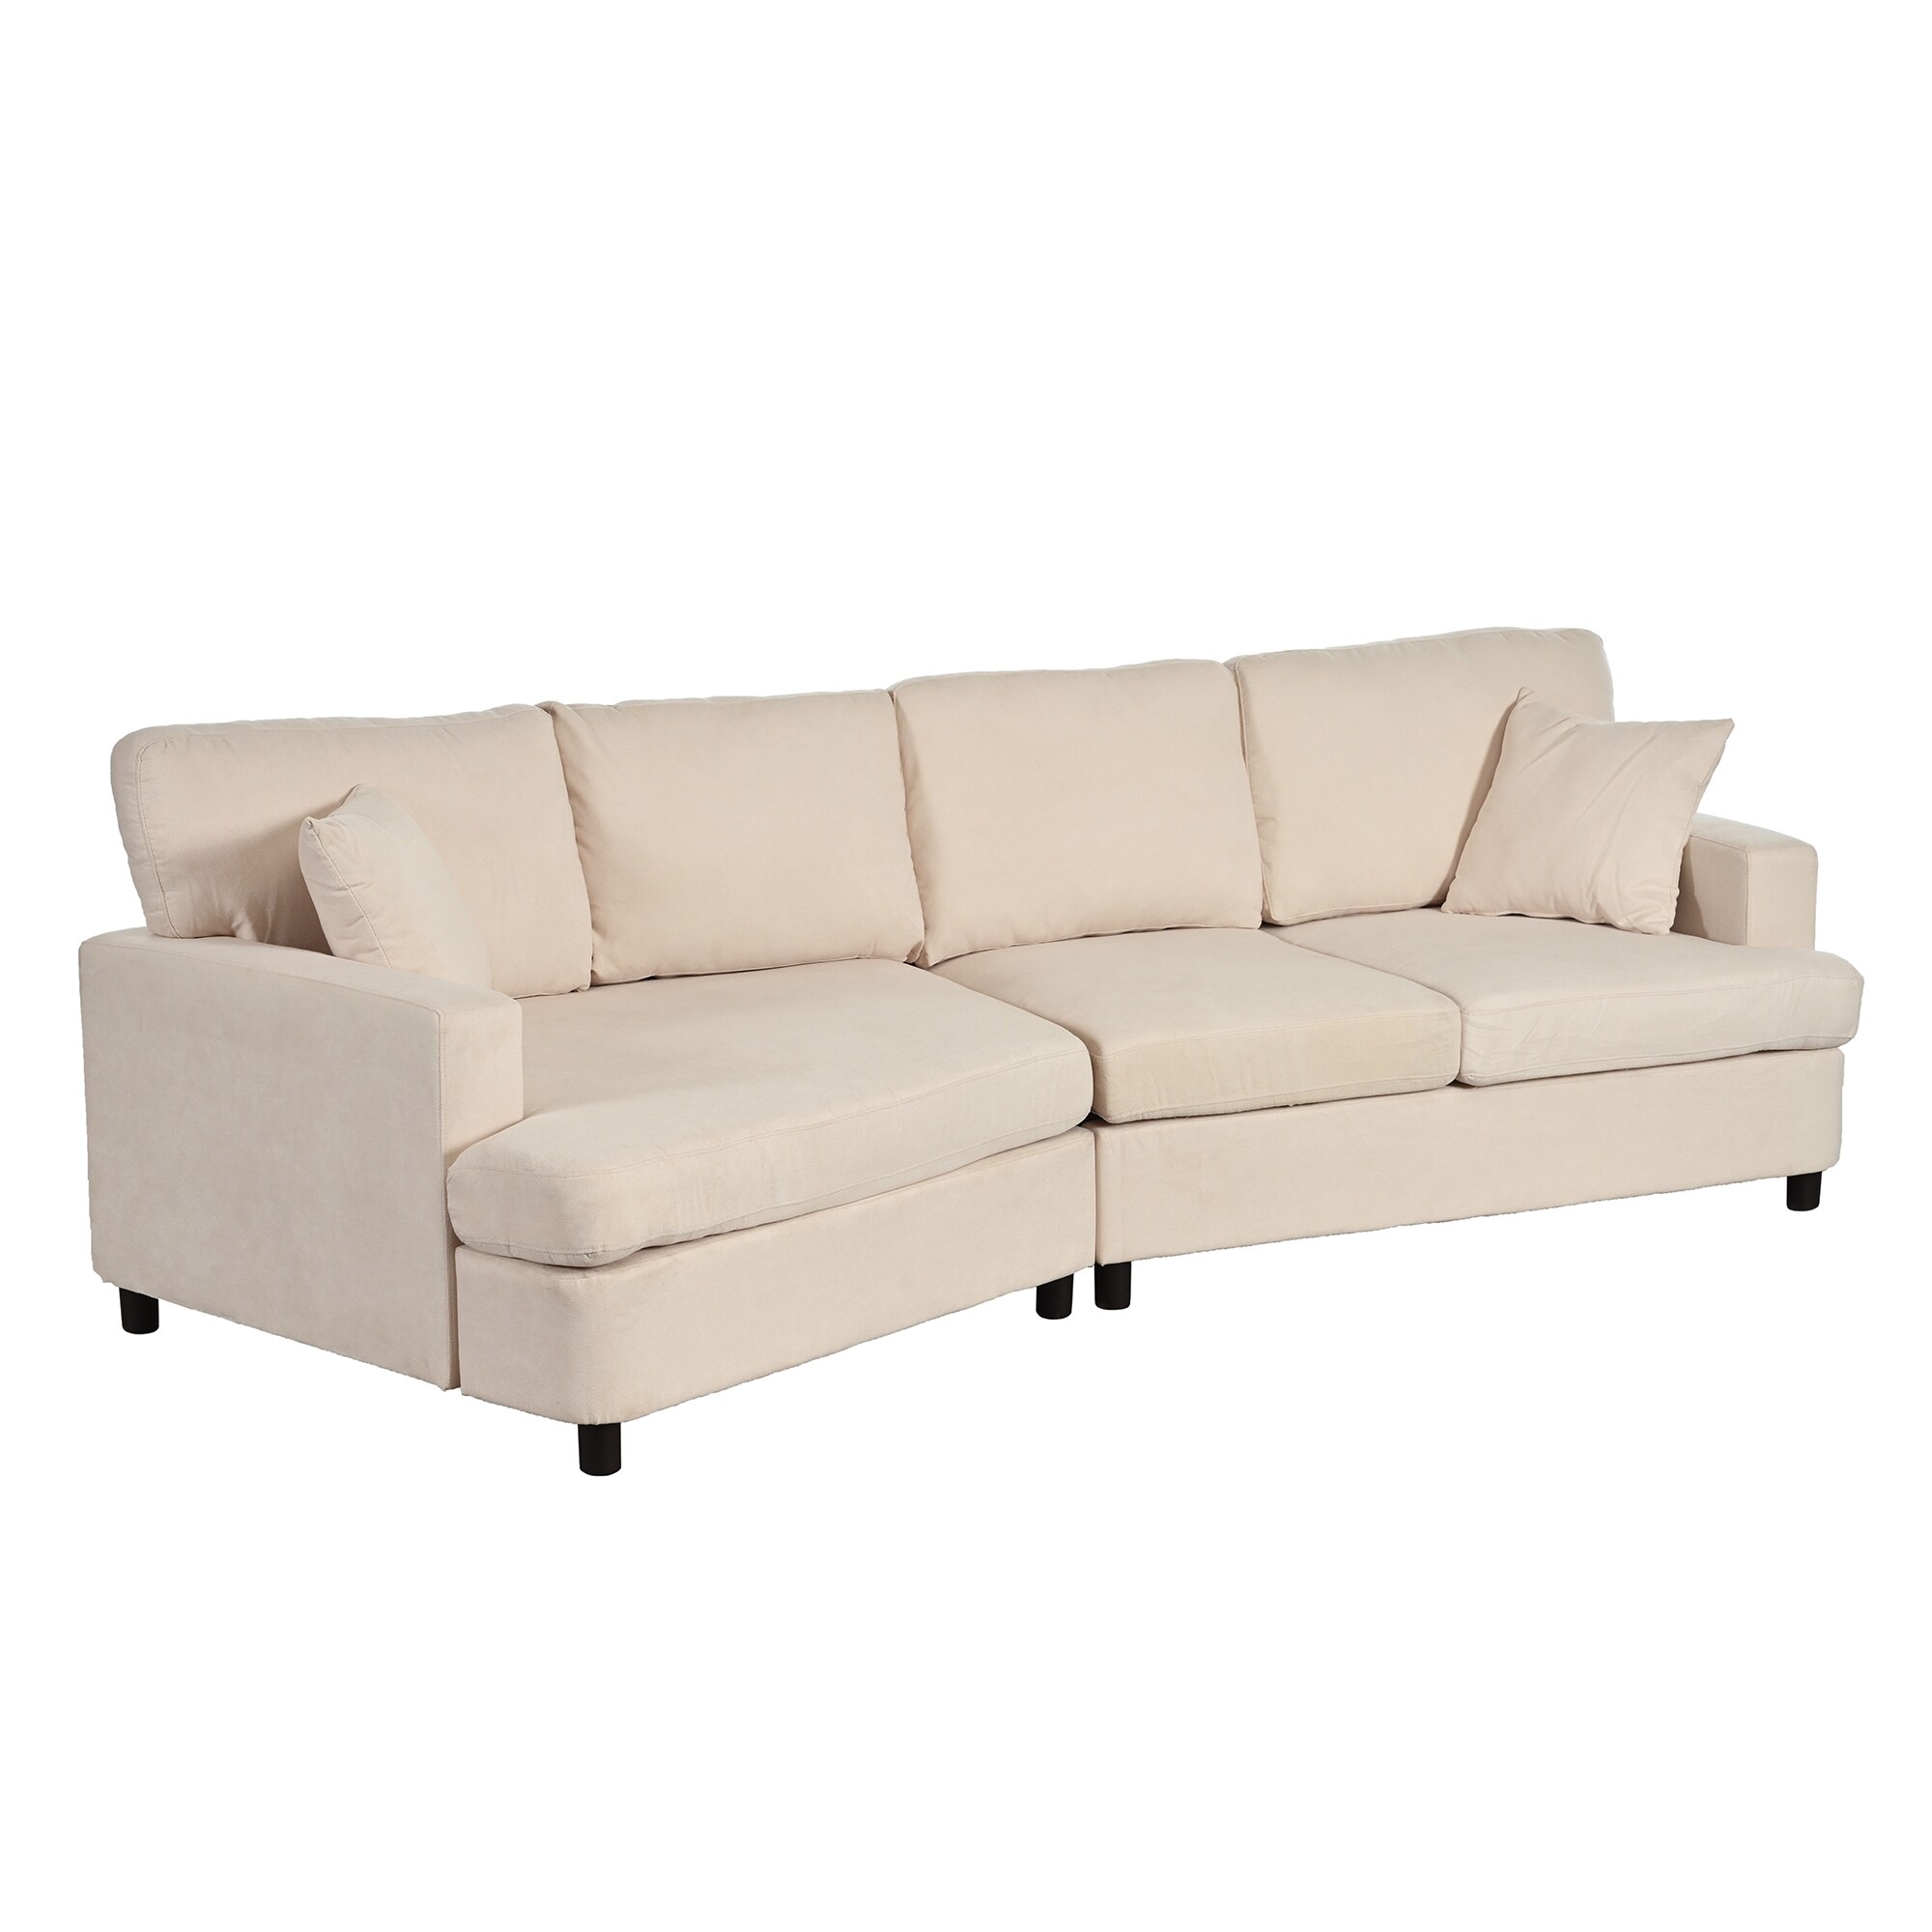 https://ak1.ostkcdn.com/images/products/is/images/direct/6c0e42c0fdf6cfce75cba2c7a95b6e8ea4b253b2/3-Seat-Streamlined-Sofa-With-Removable-Back-And-Seat-Cushions-And-2-Pillows.jpg